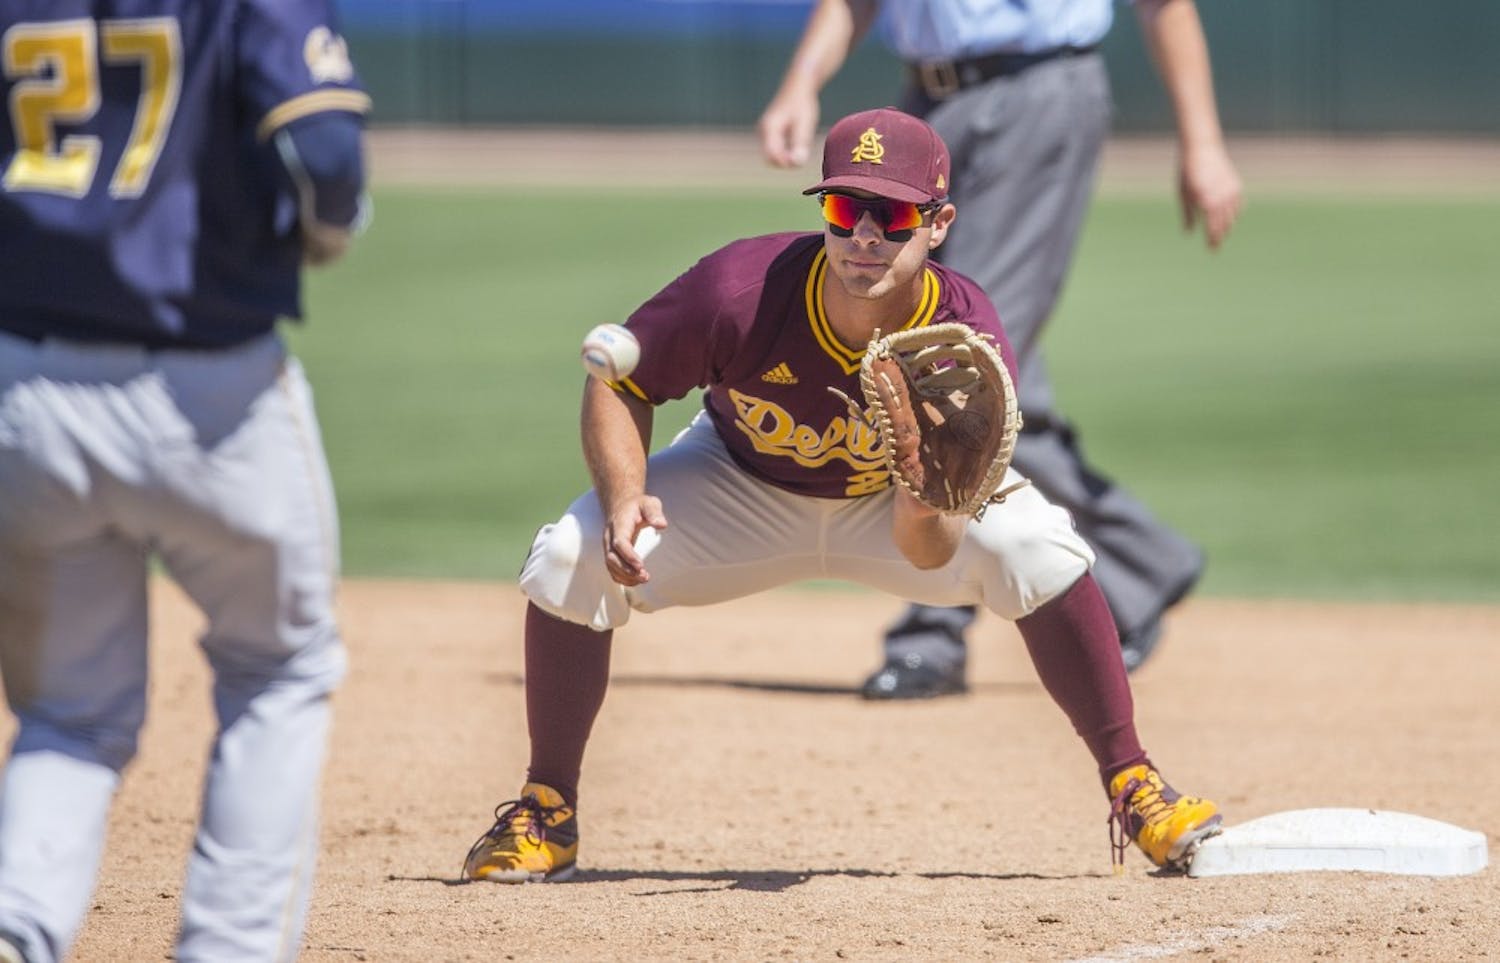 ASU baseball's David Greer catches a ball and forces out runner Davin Pearson during a game against California at Phoenix Municipal Stadium in Phoenix, Arizona, on Saturday, April 16, 2016. 